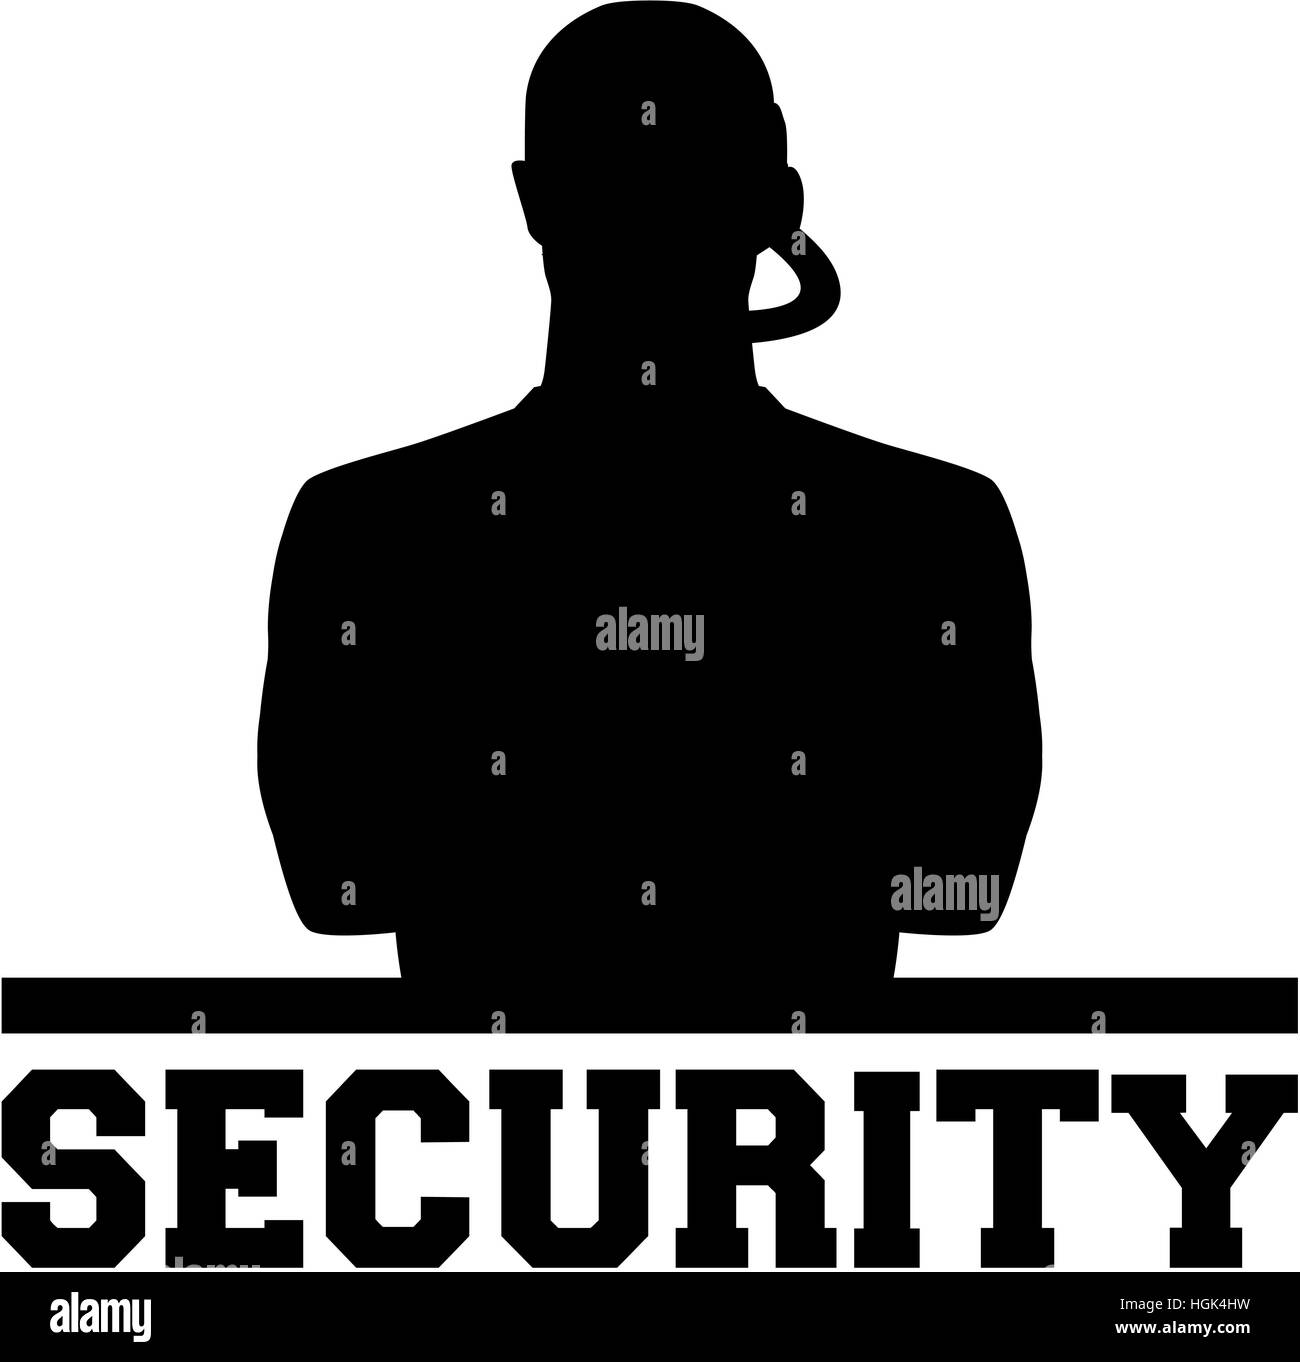 Secuirty silhouette with word Stock Photo